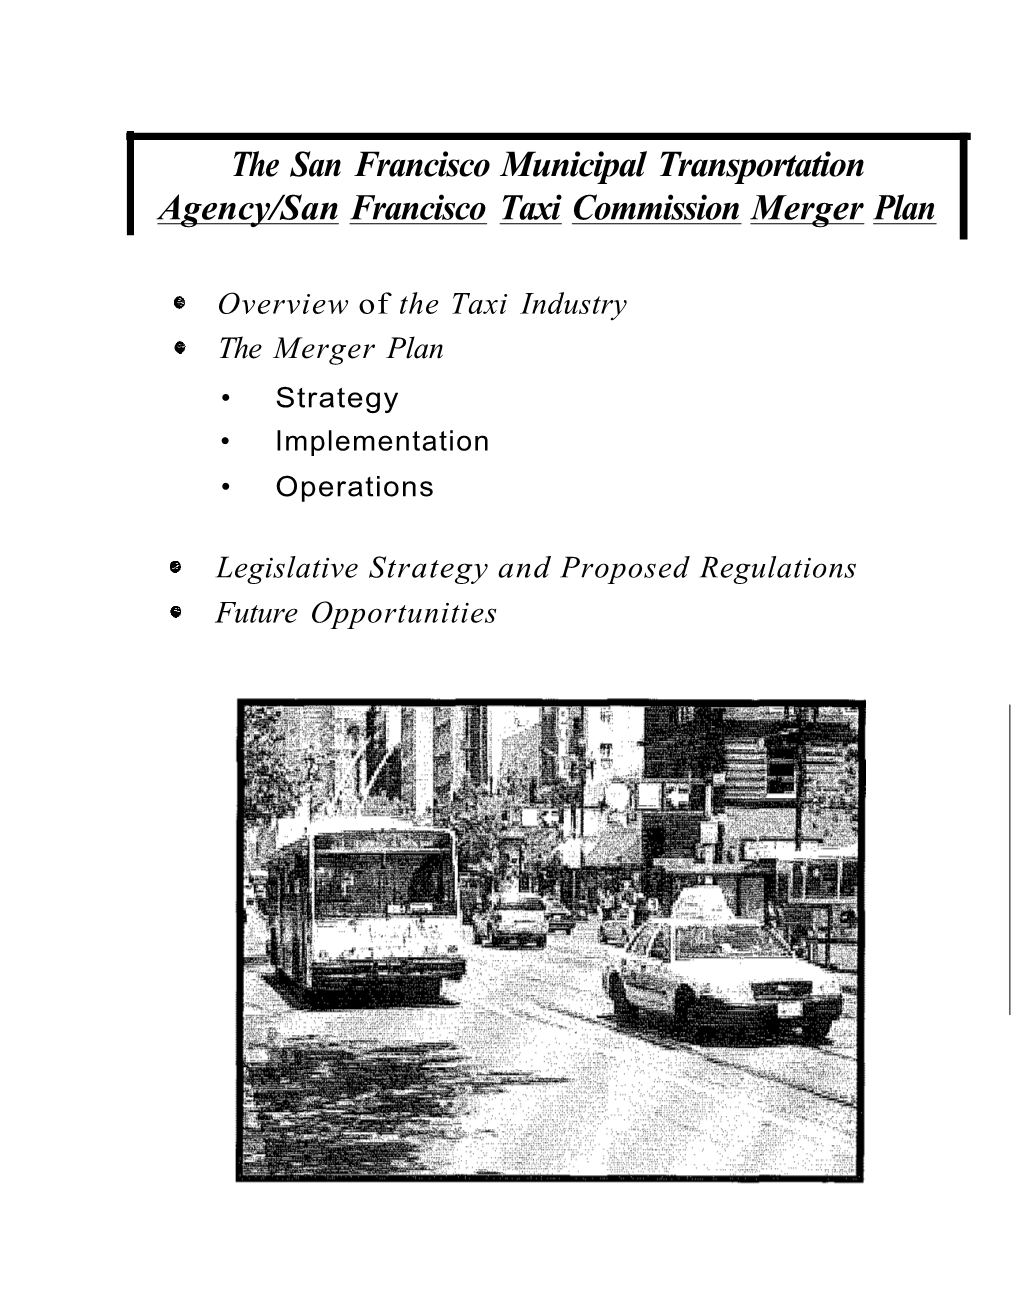 Taxi Commission Overview and Merger Plan